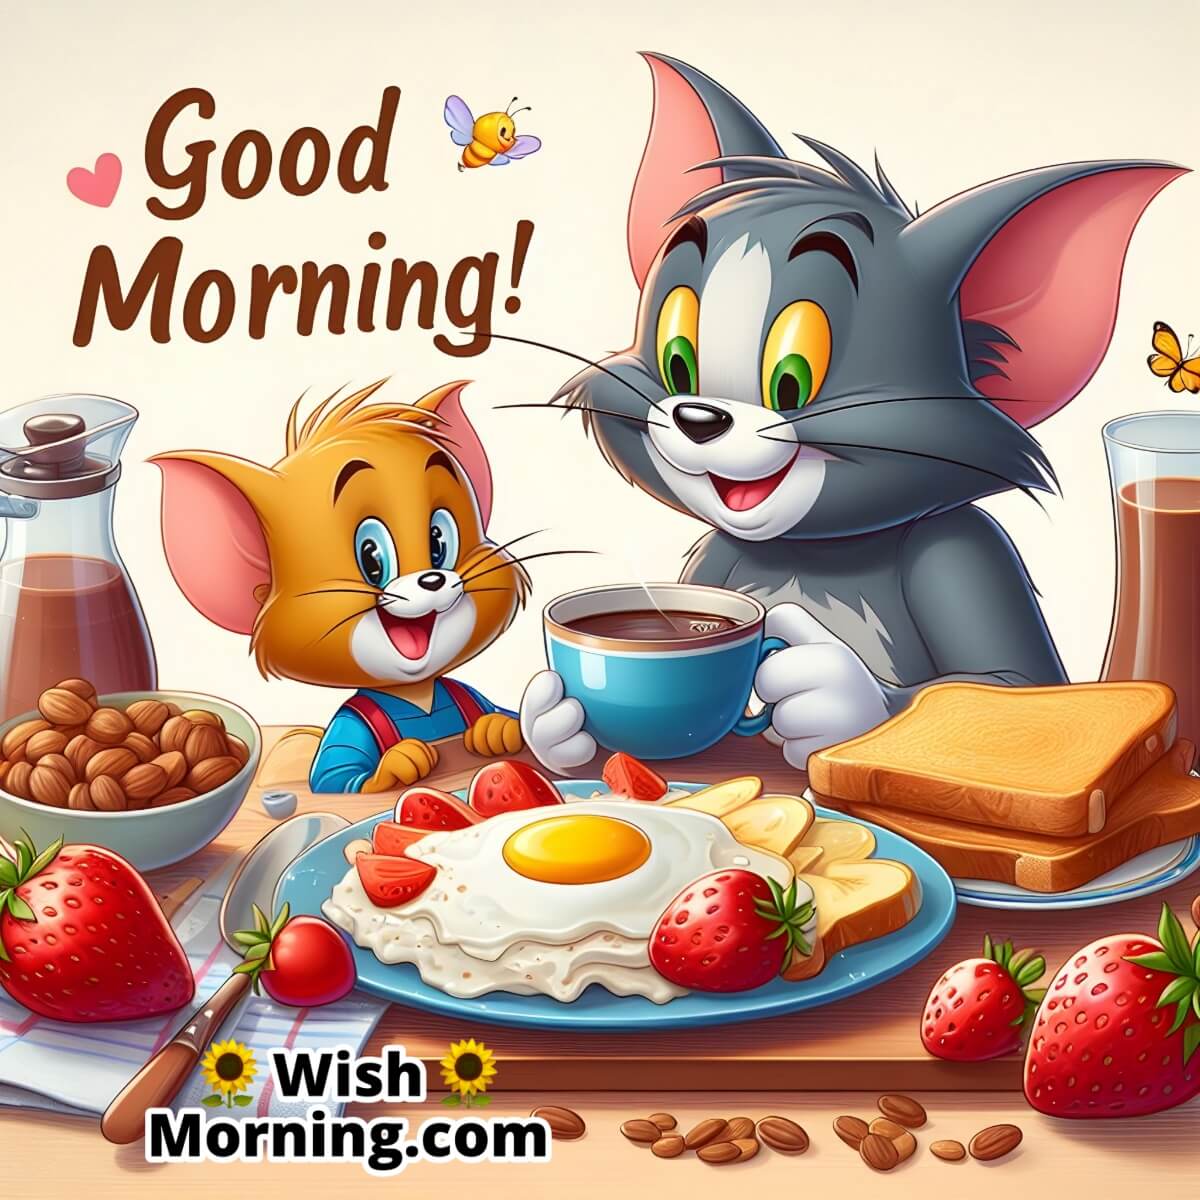 Good Morning Tom And Jerry Breakfast Image